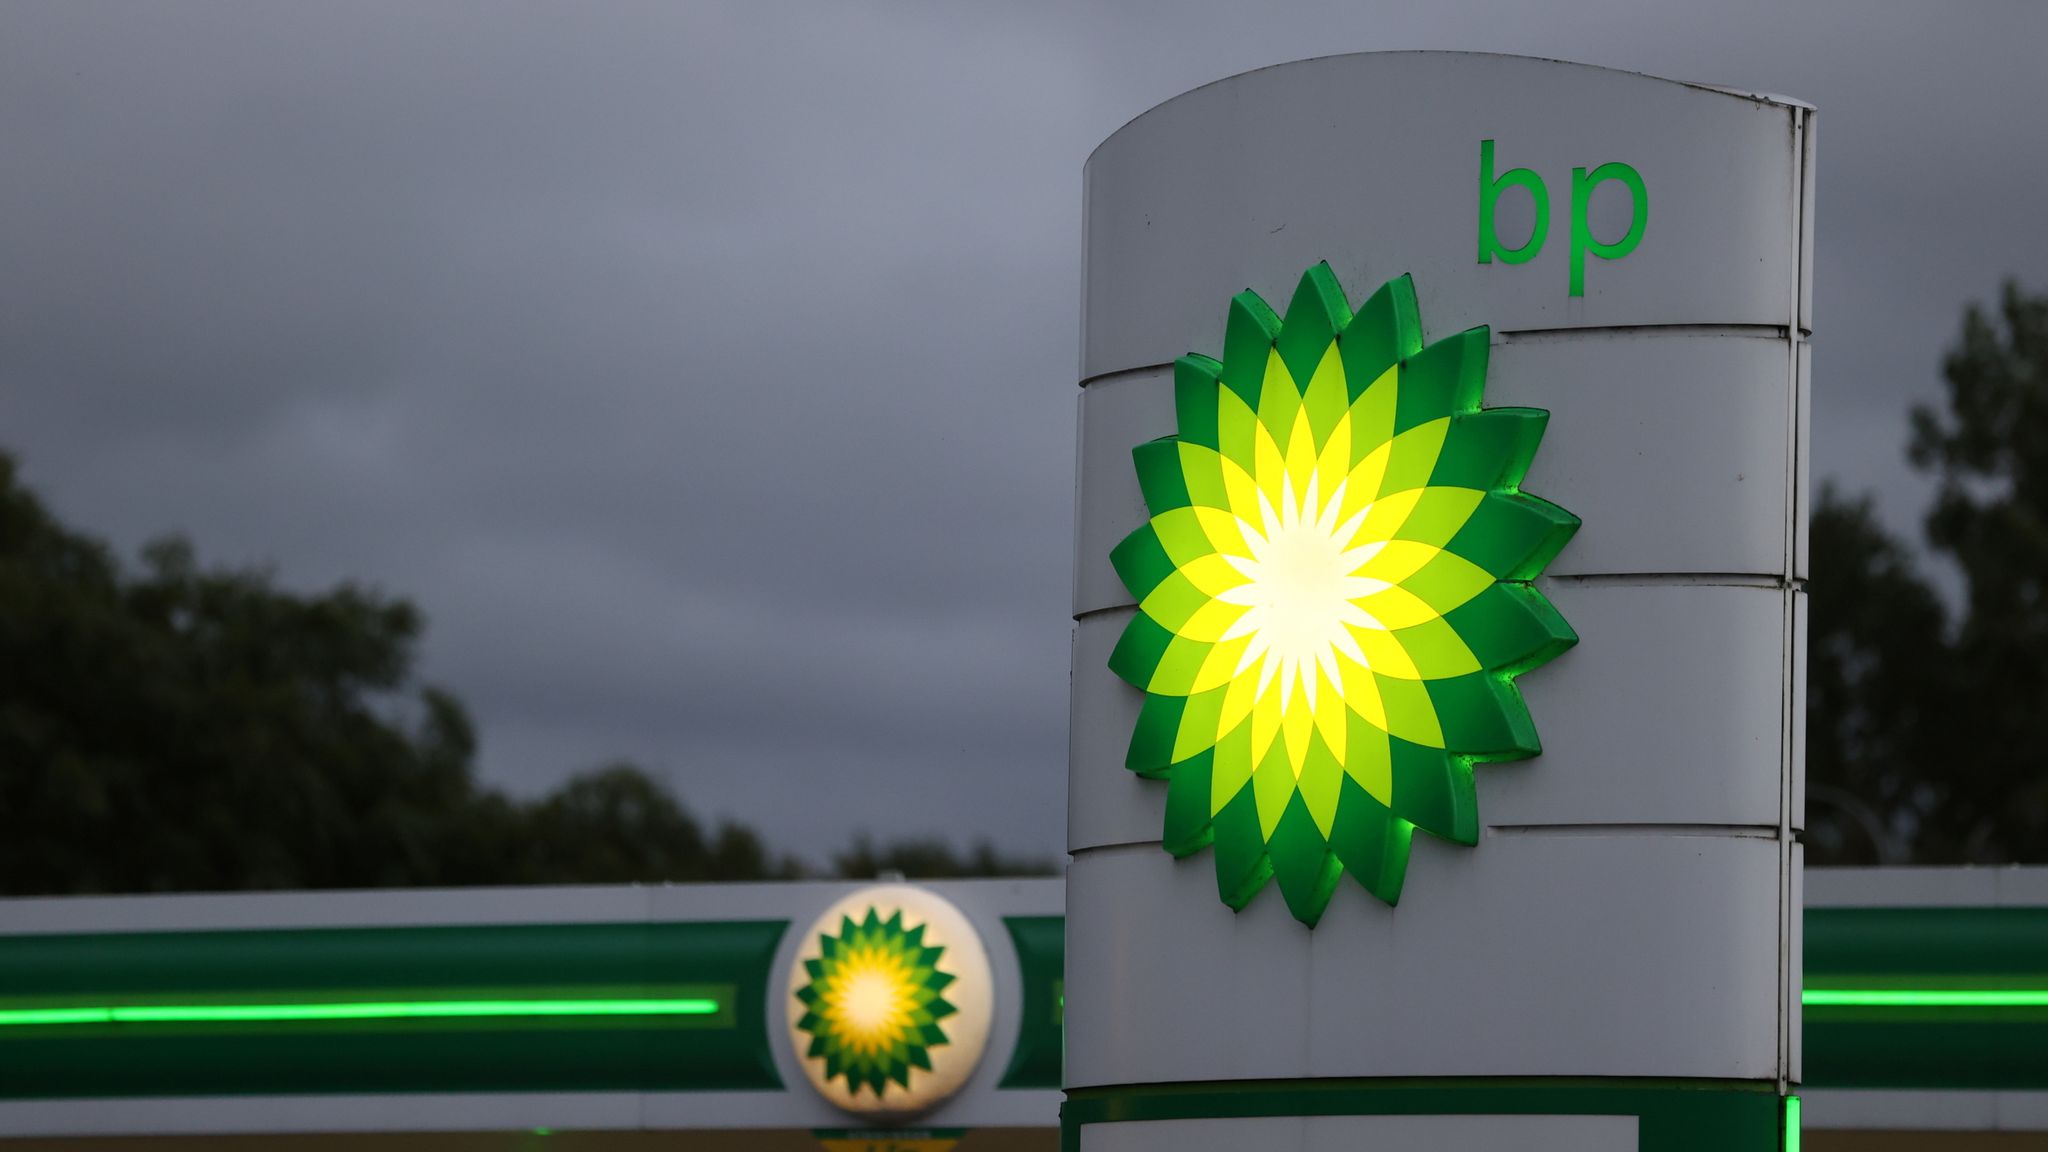 bp-quarterly-profits-come-in-at-7-1bn-after-gas-prices-surge-as